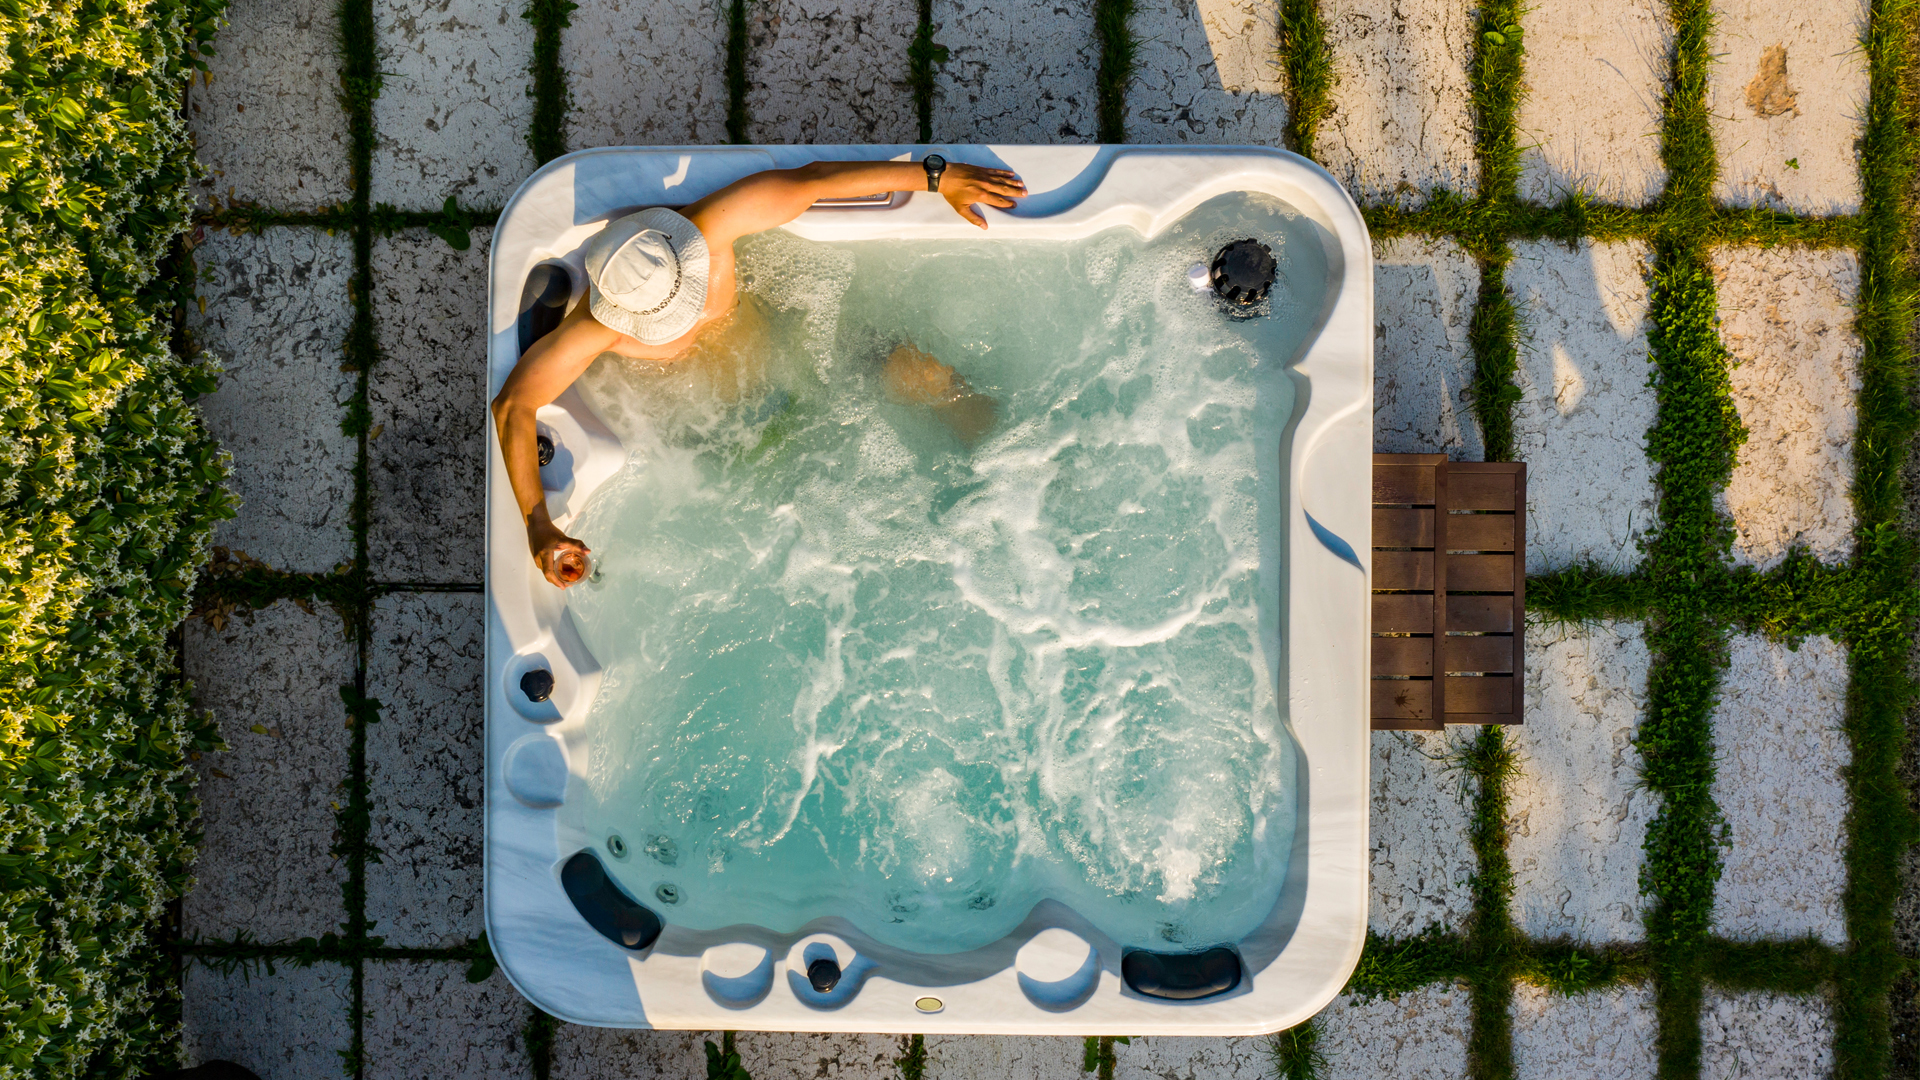 Find Out Now, What Should You Do For Fast Backyard Hot Tub Privacy?